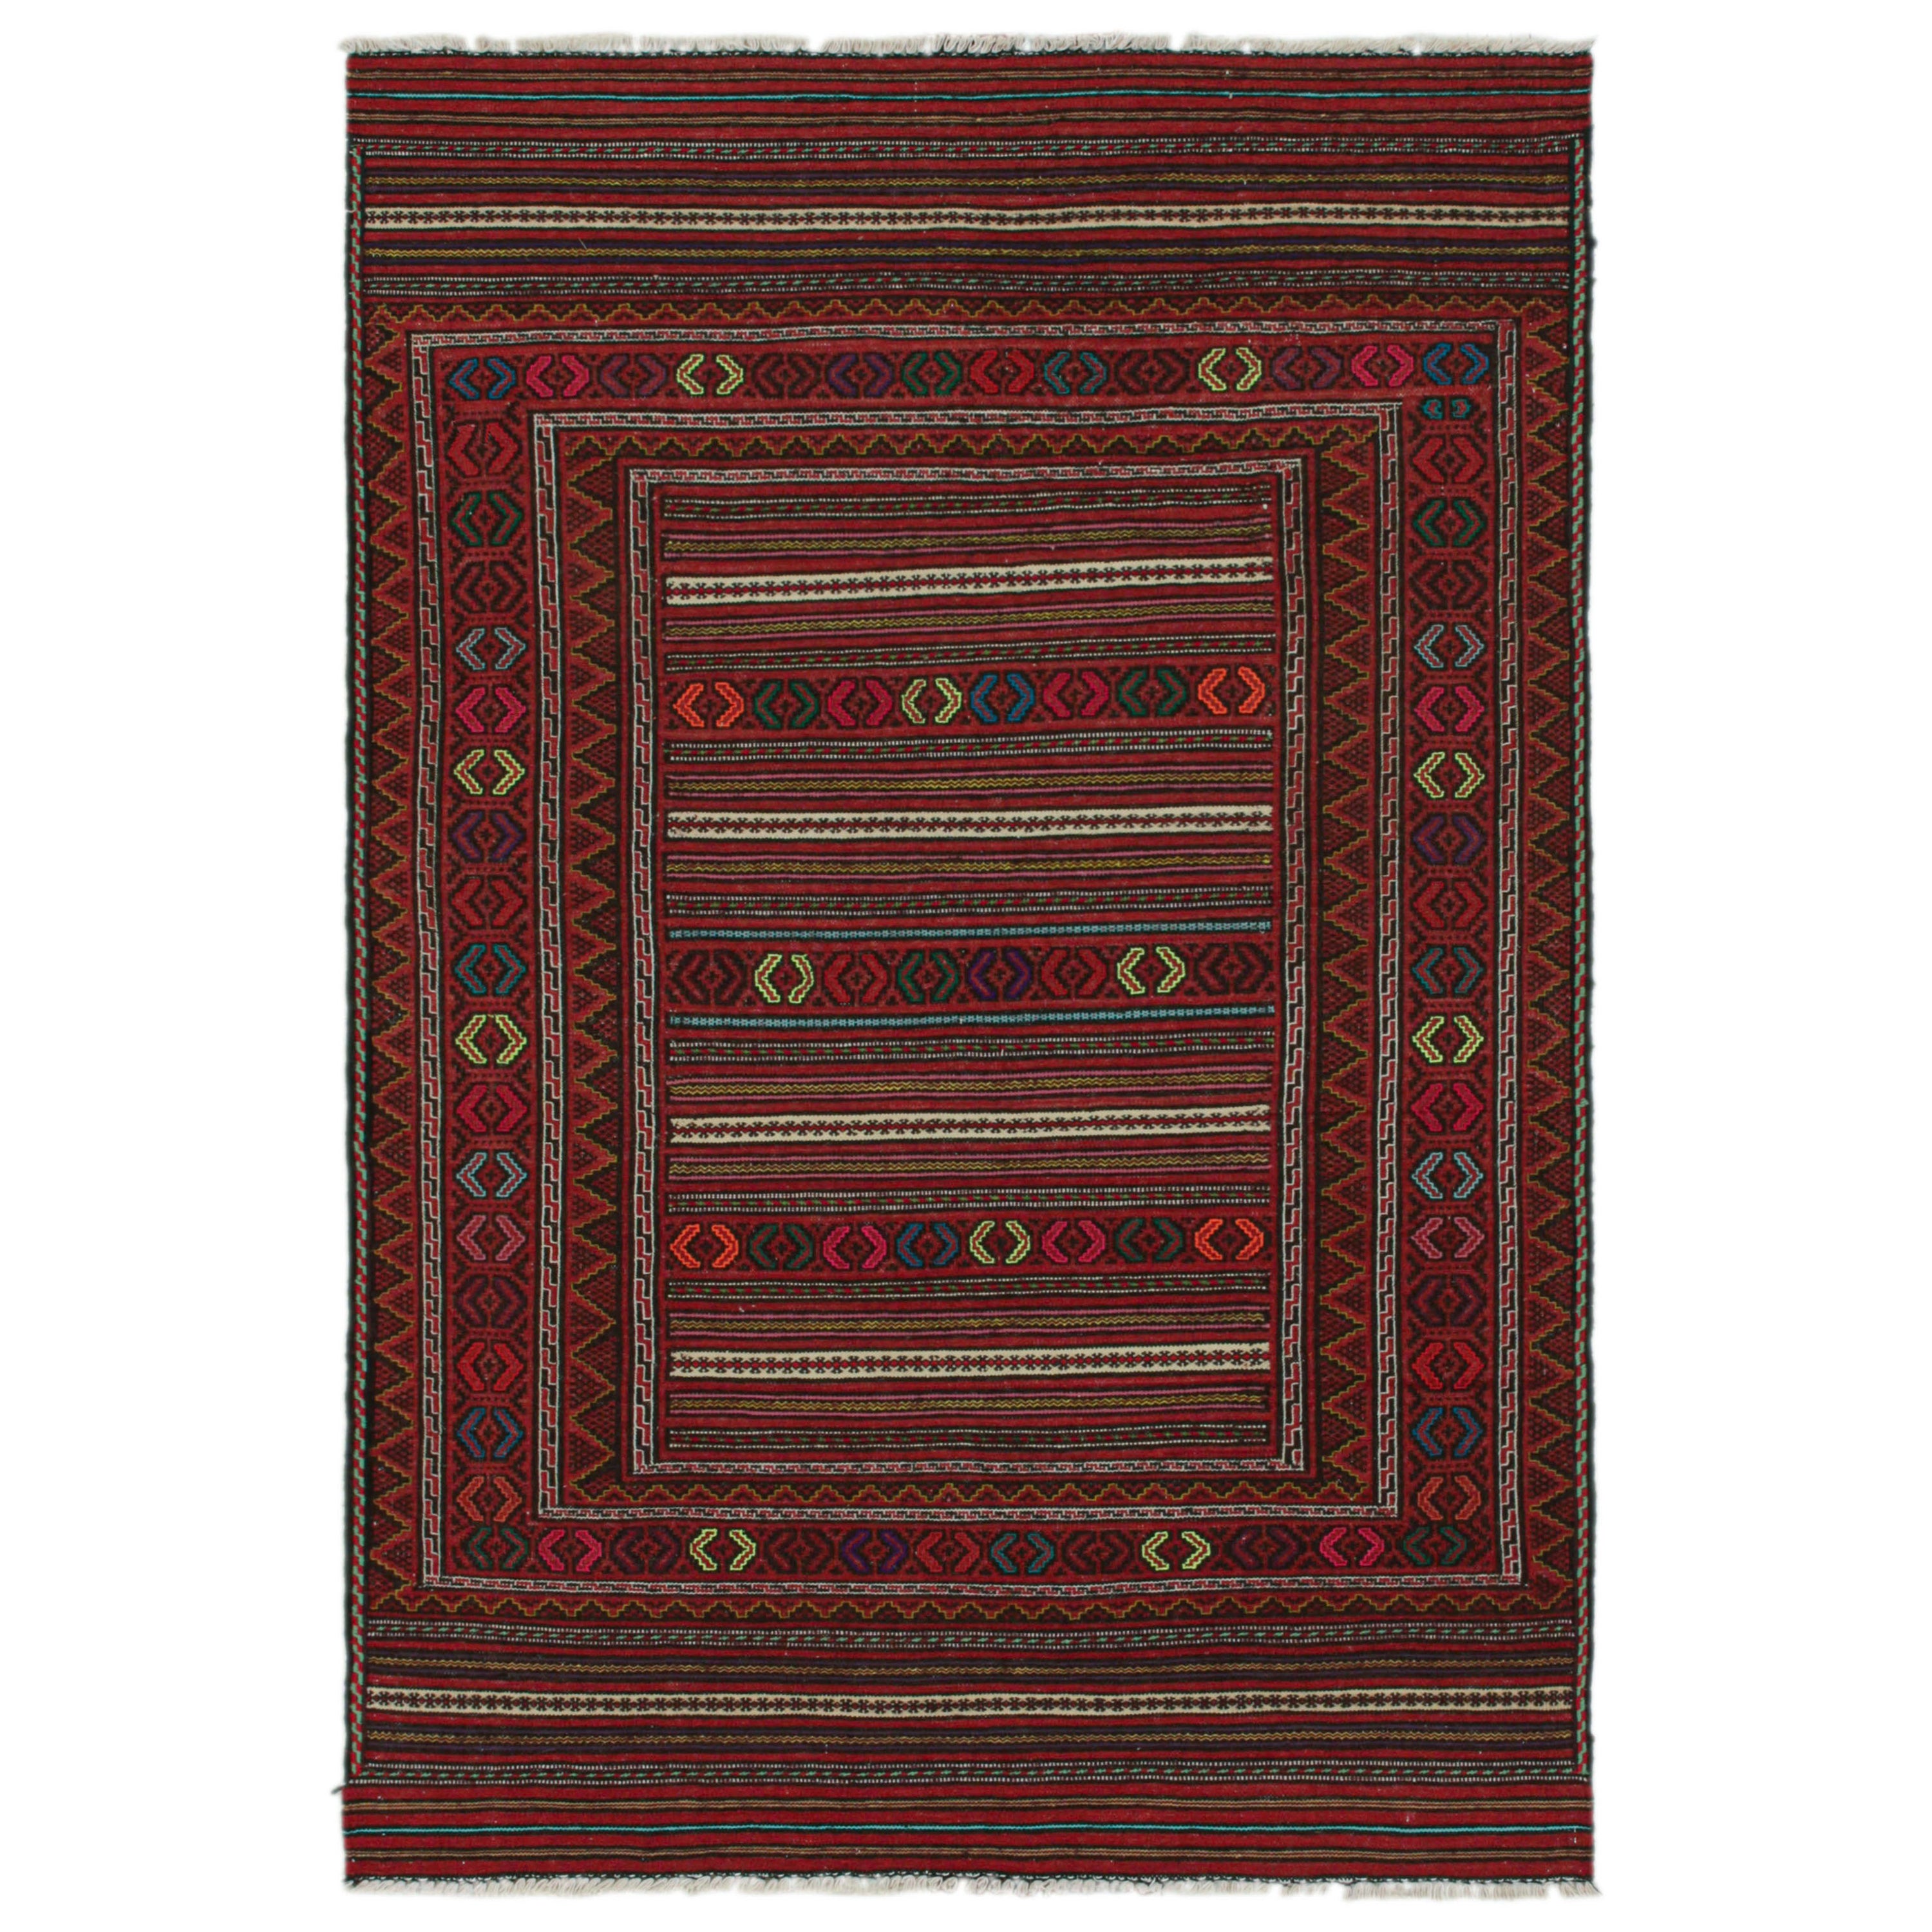 Vintage Baluch Kilim Rug in Red with Stripes and Tribal Motifs, from Rug & Kilim For Sale